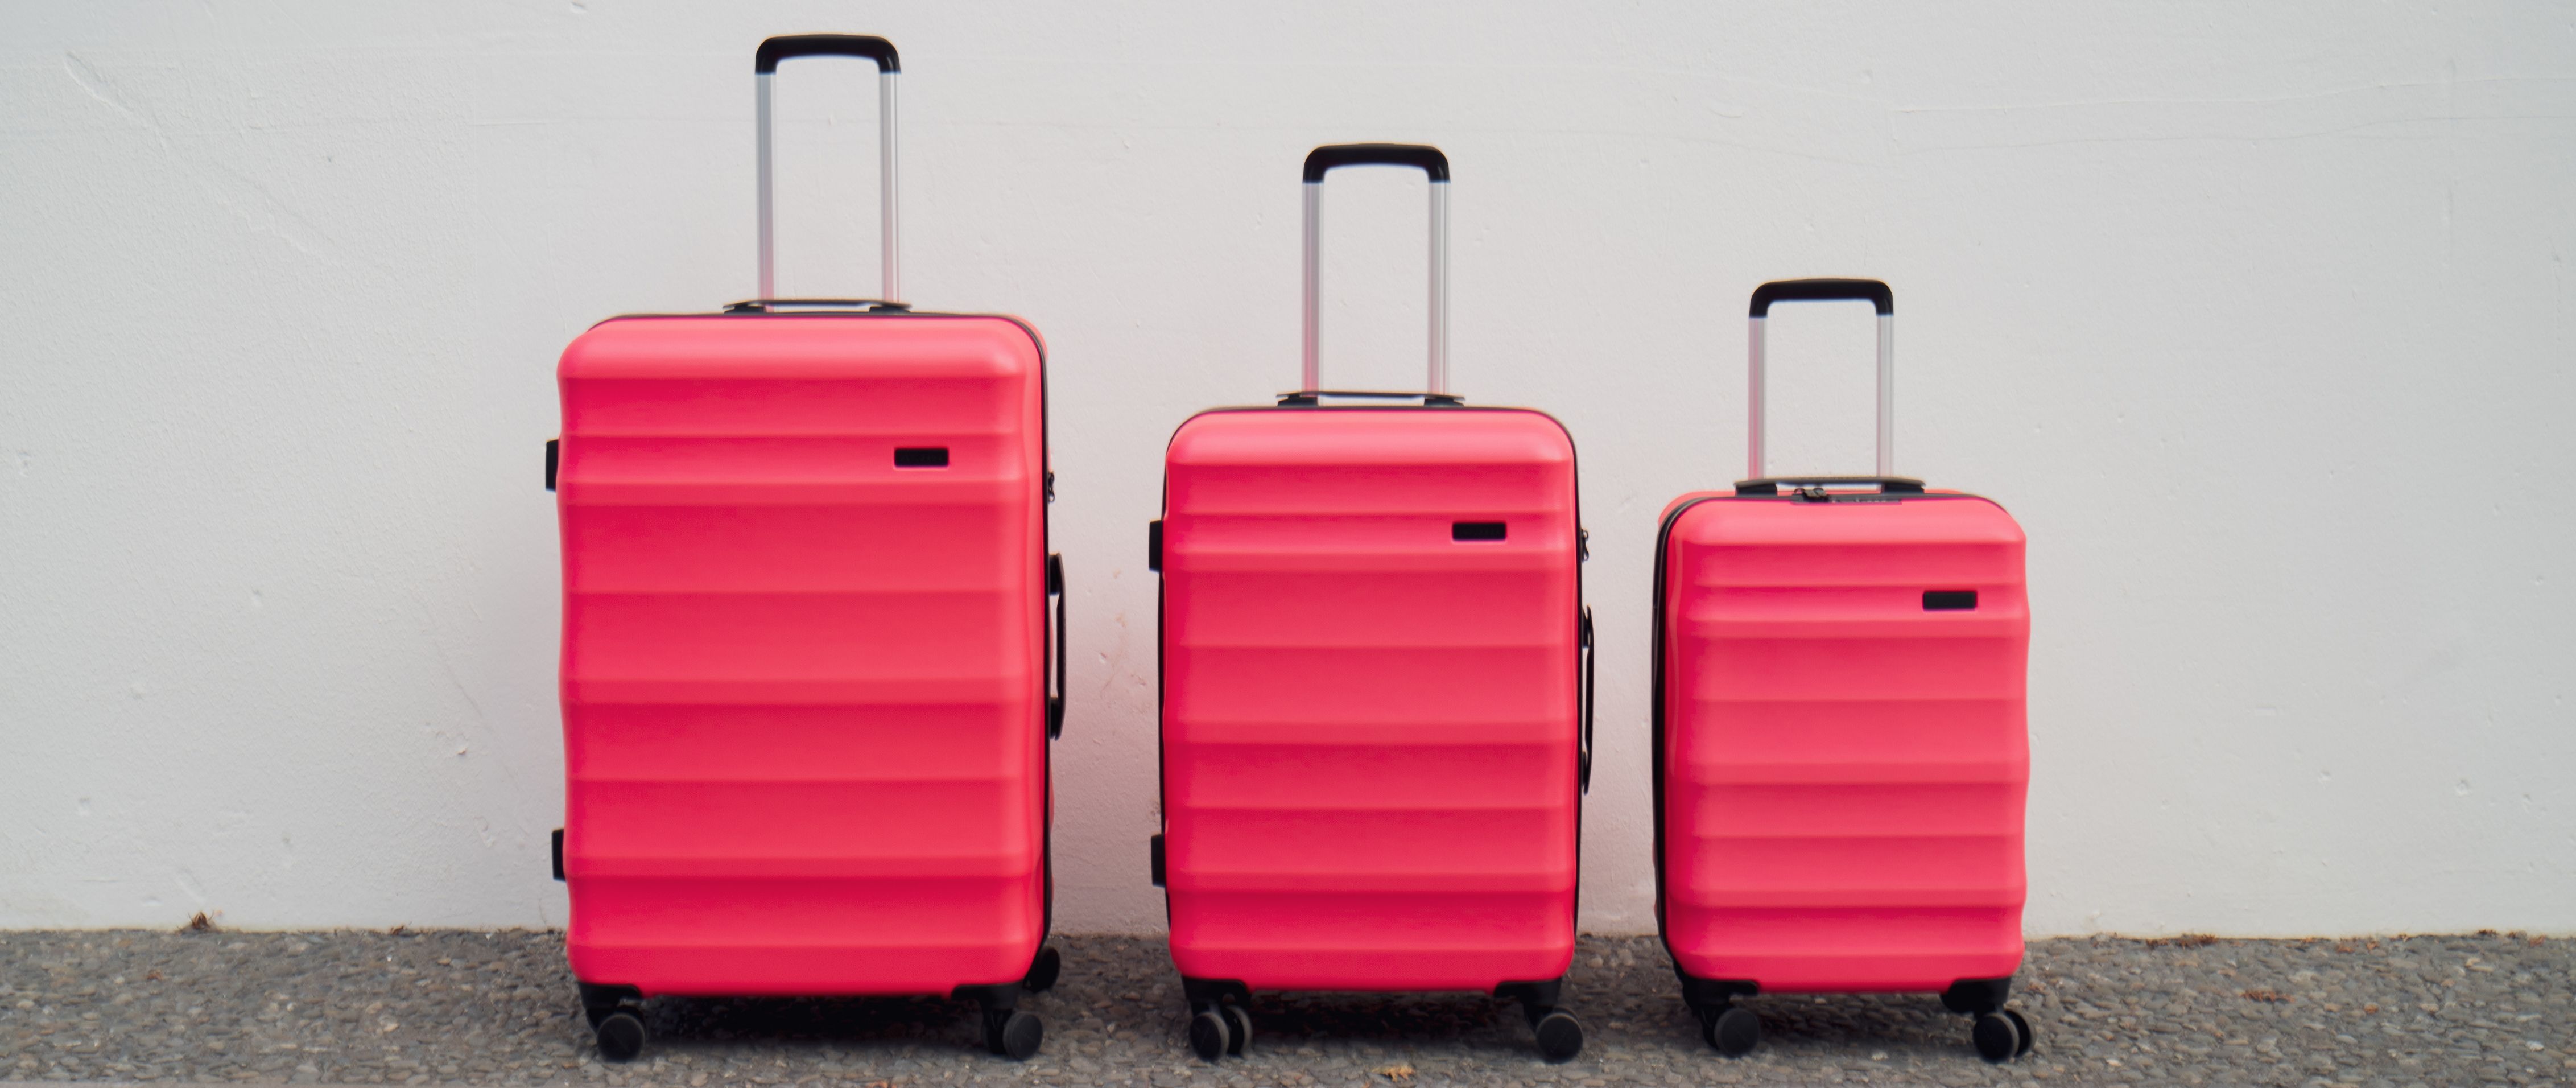 Luggage Sizes Charts for All Luggage (Diagrams) - JourneyJunket